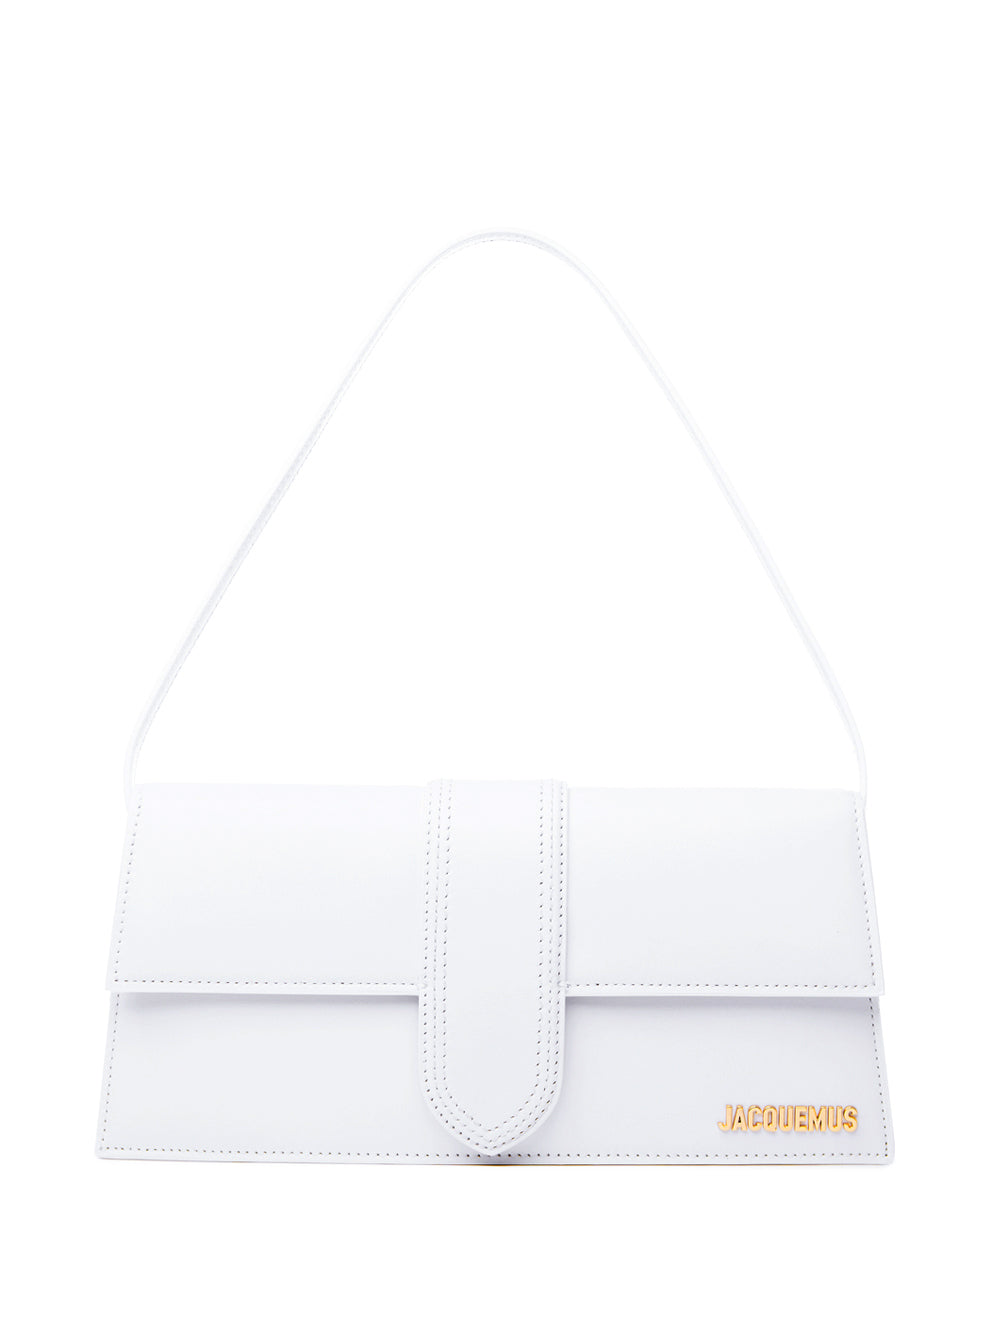 Jacquemus Le Child Long Bag in White.